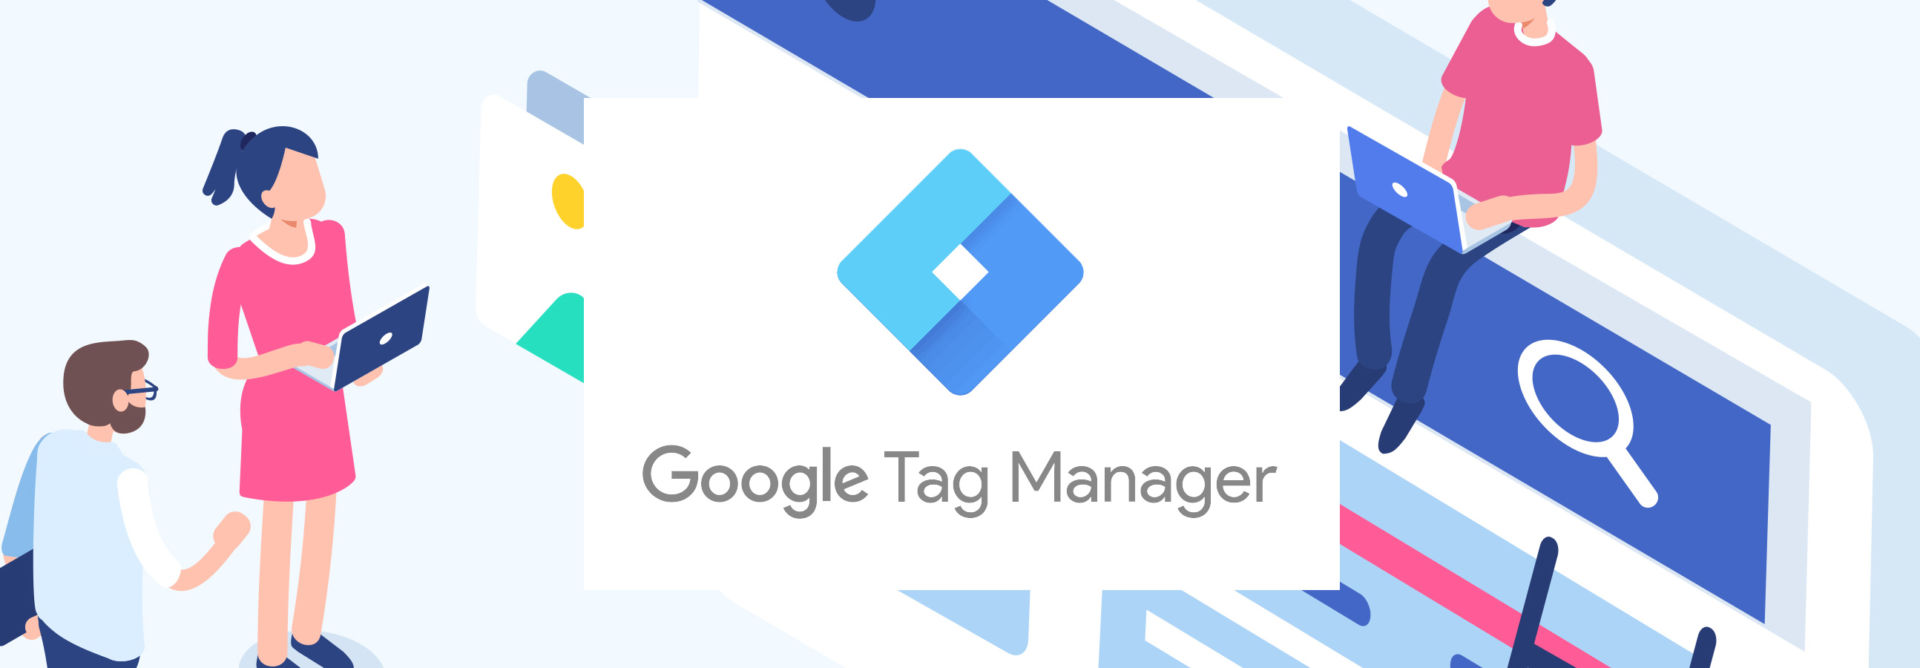 Google Tag Manager 101